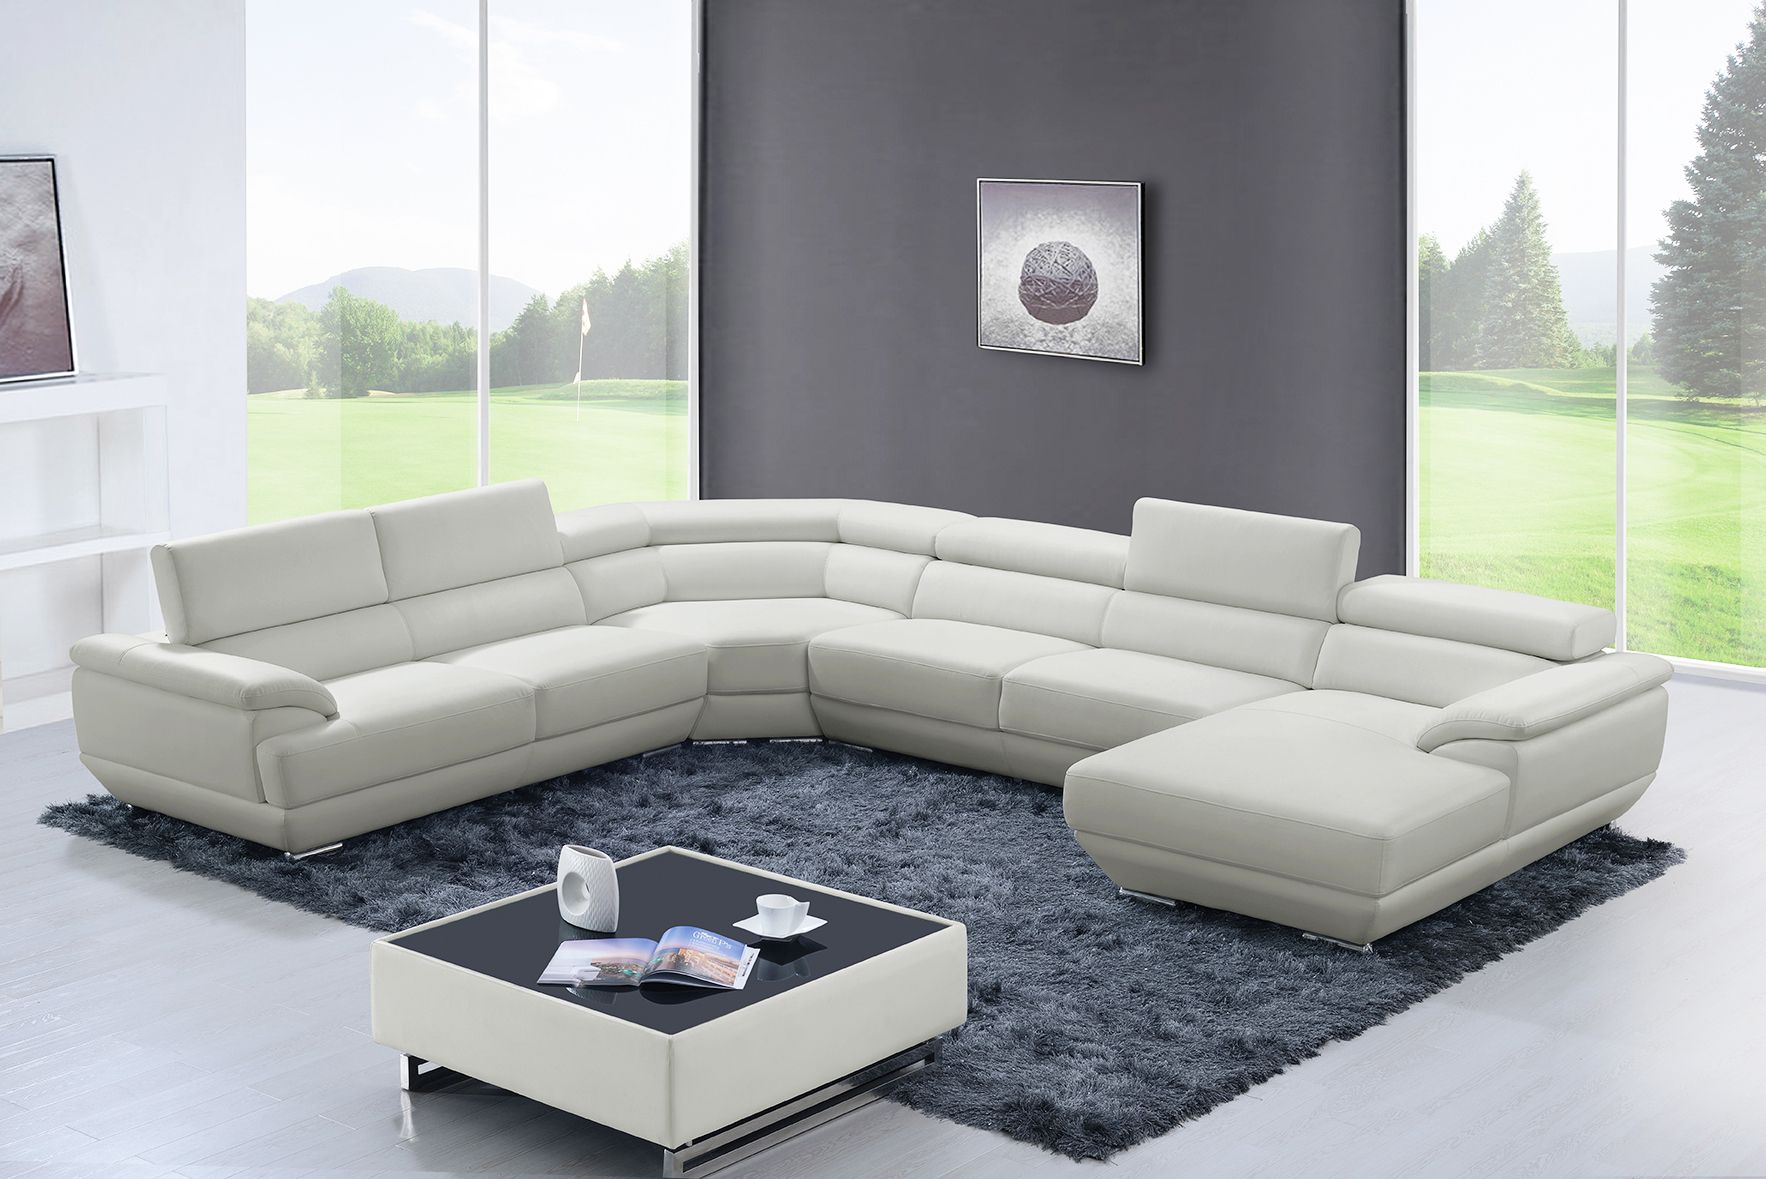 430 Sectional Off White, Sectionals, Living Room Furniture Inside Sectional Sofas In White (View 3 of 15)